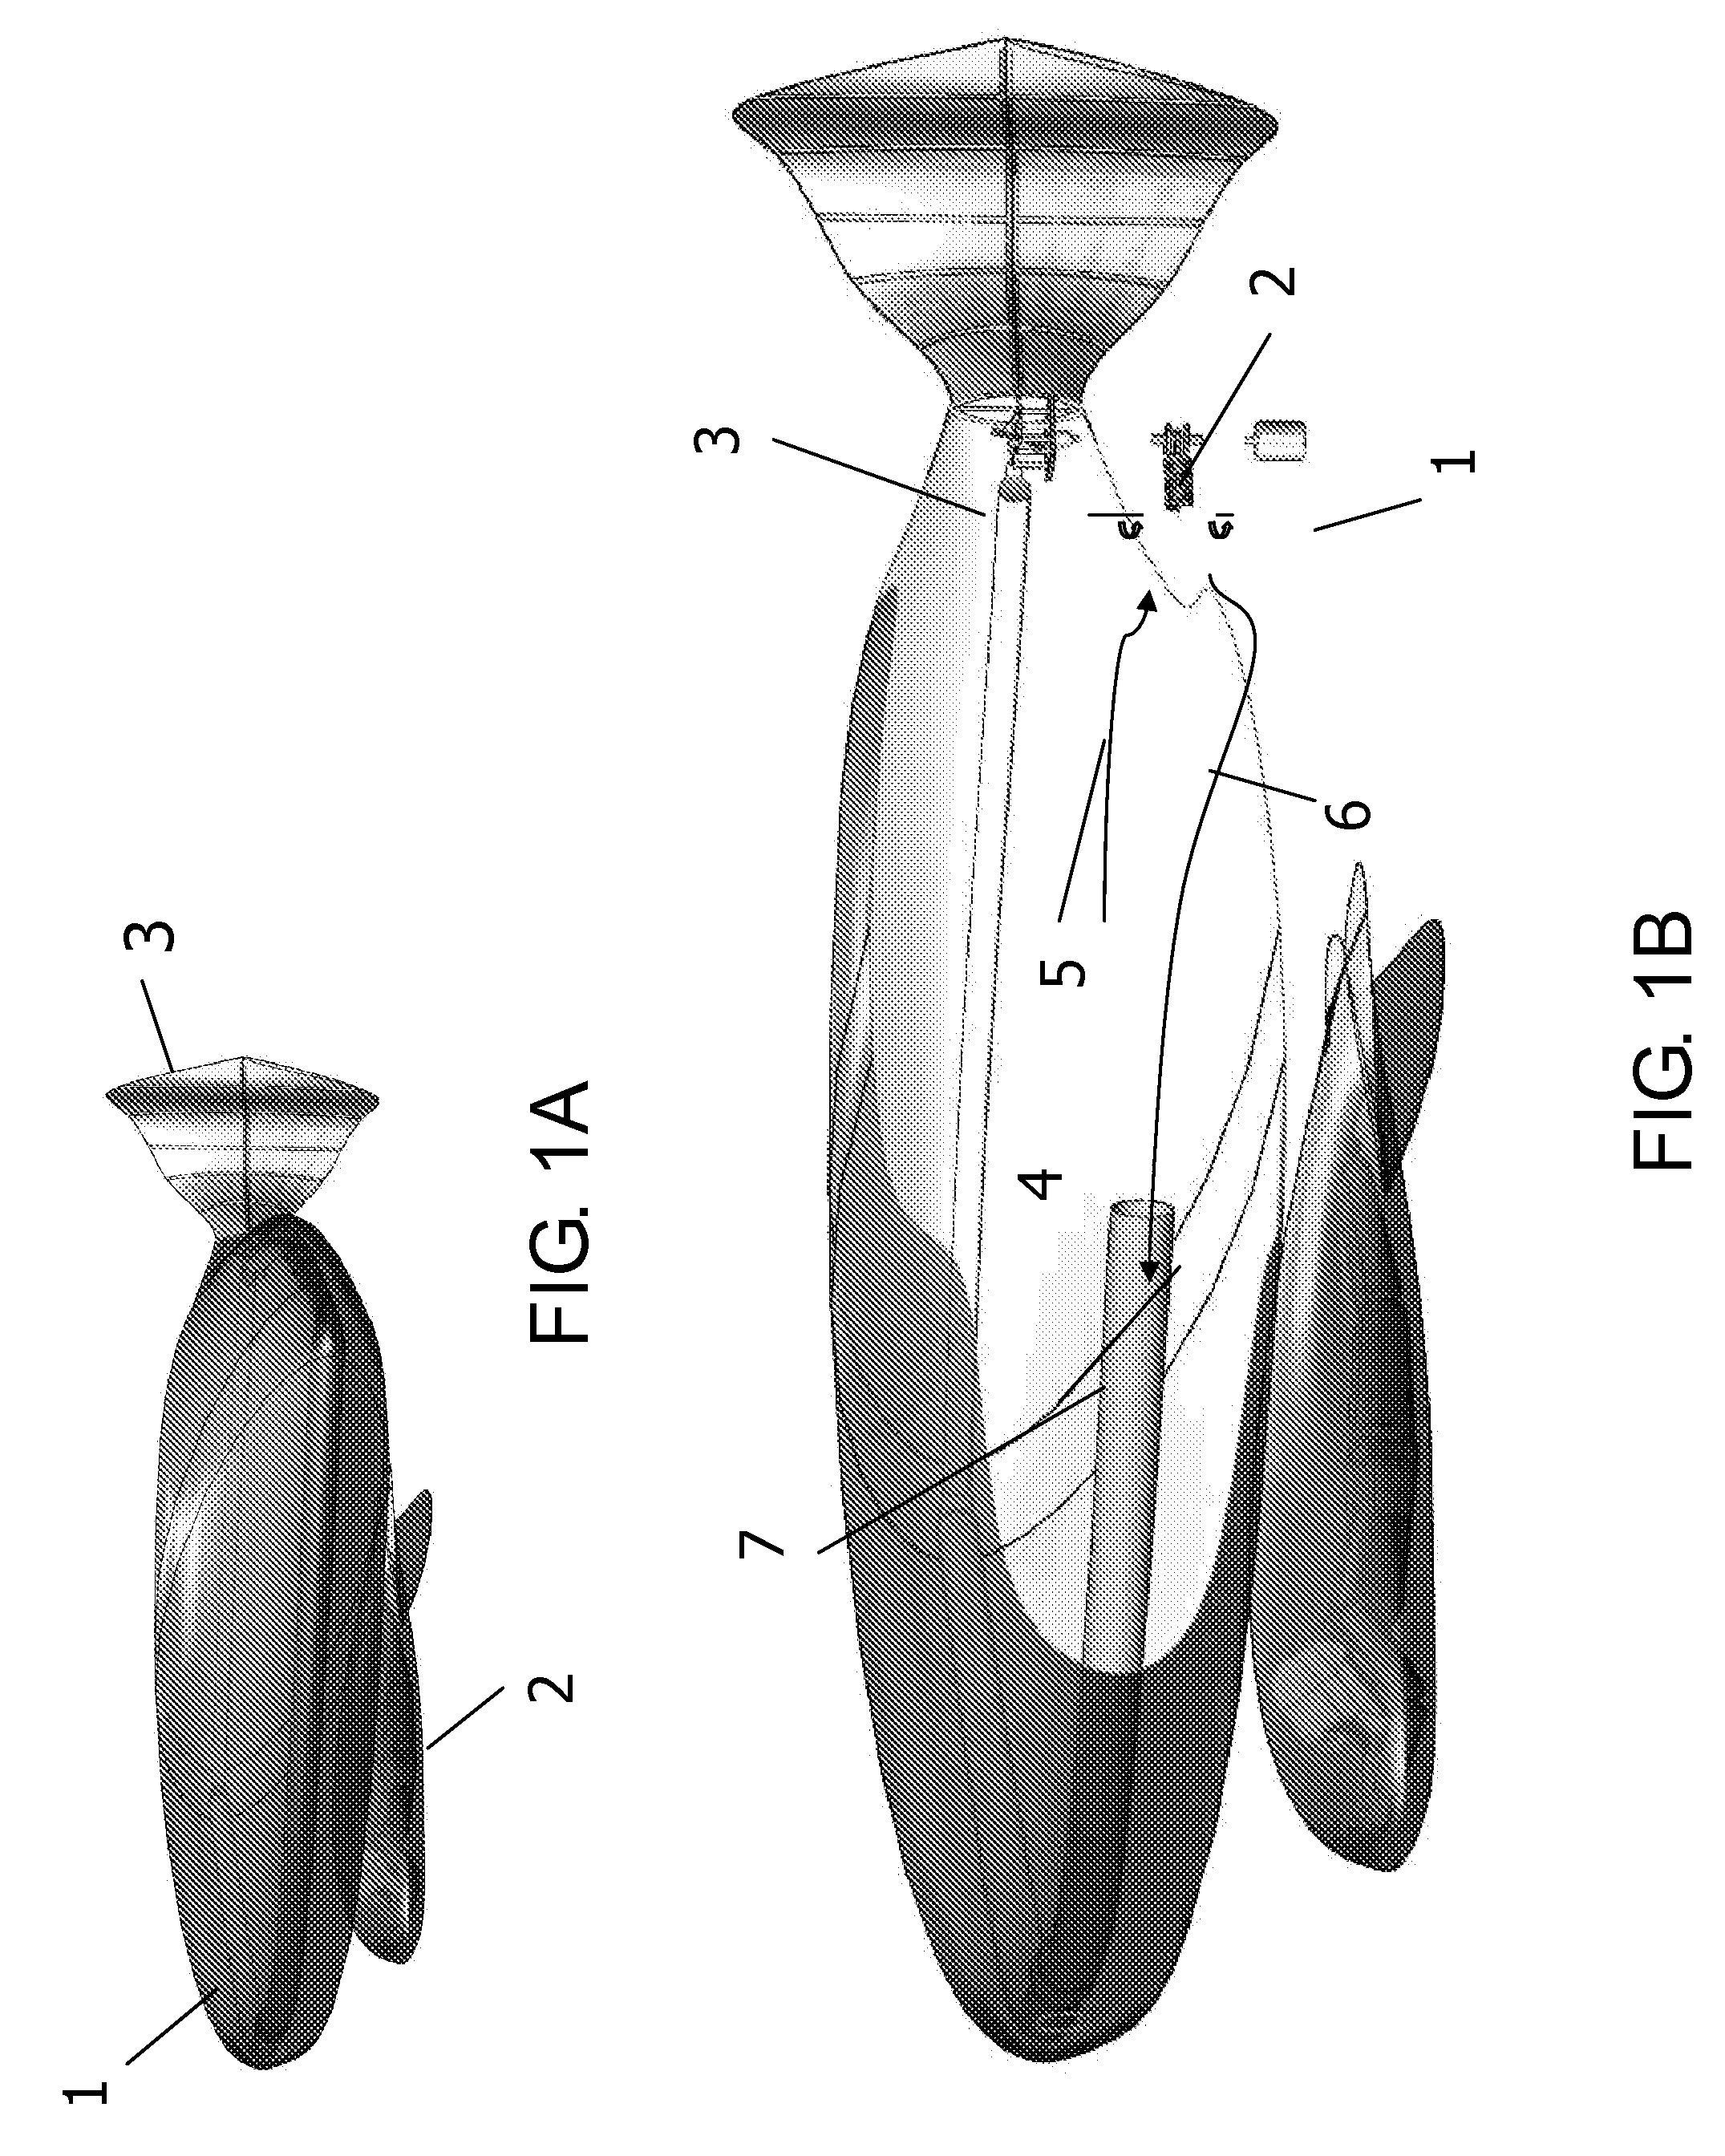 System, method, and apparatus for hybrid dynamic shape buoyant, dynamic lift-assisted air vehicle, employing aquatic-like propulsion